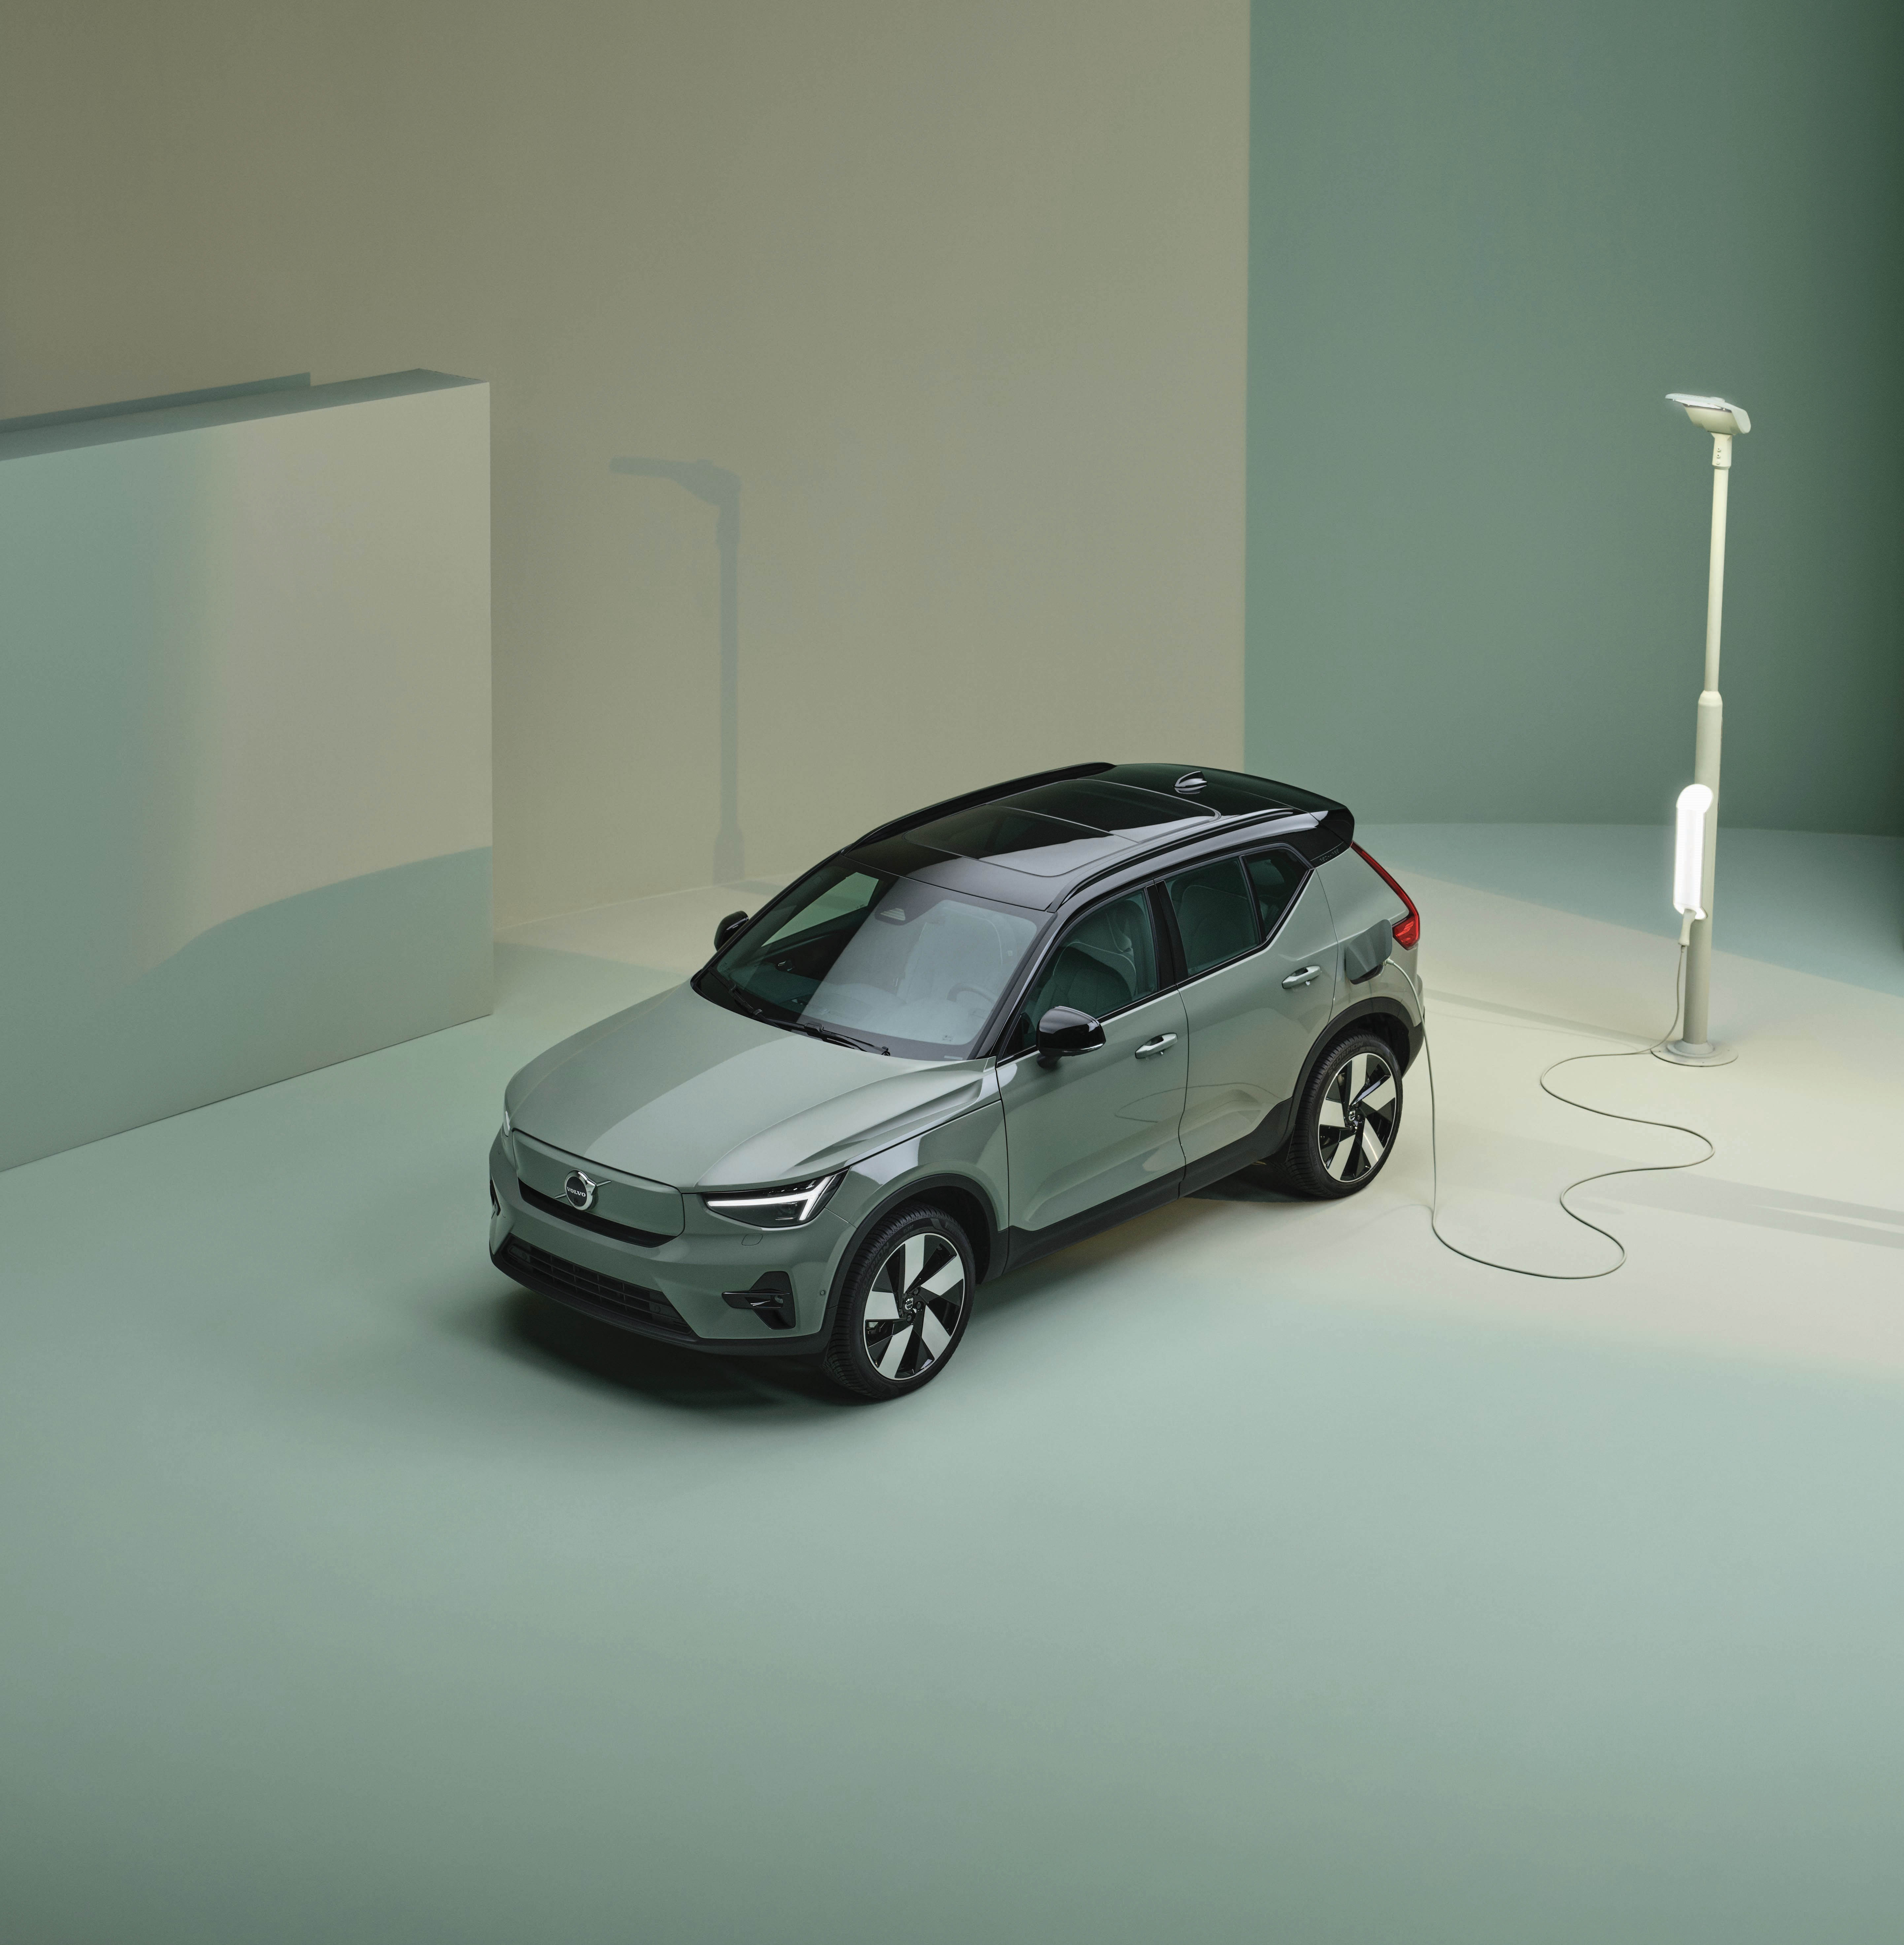 Volvo Car India launches it’s Pure Electric XC40 Recharge at Rs. 55,90,000 ex-showroom